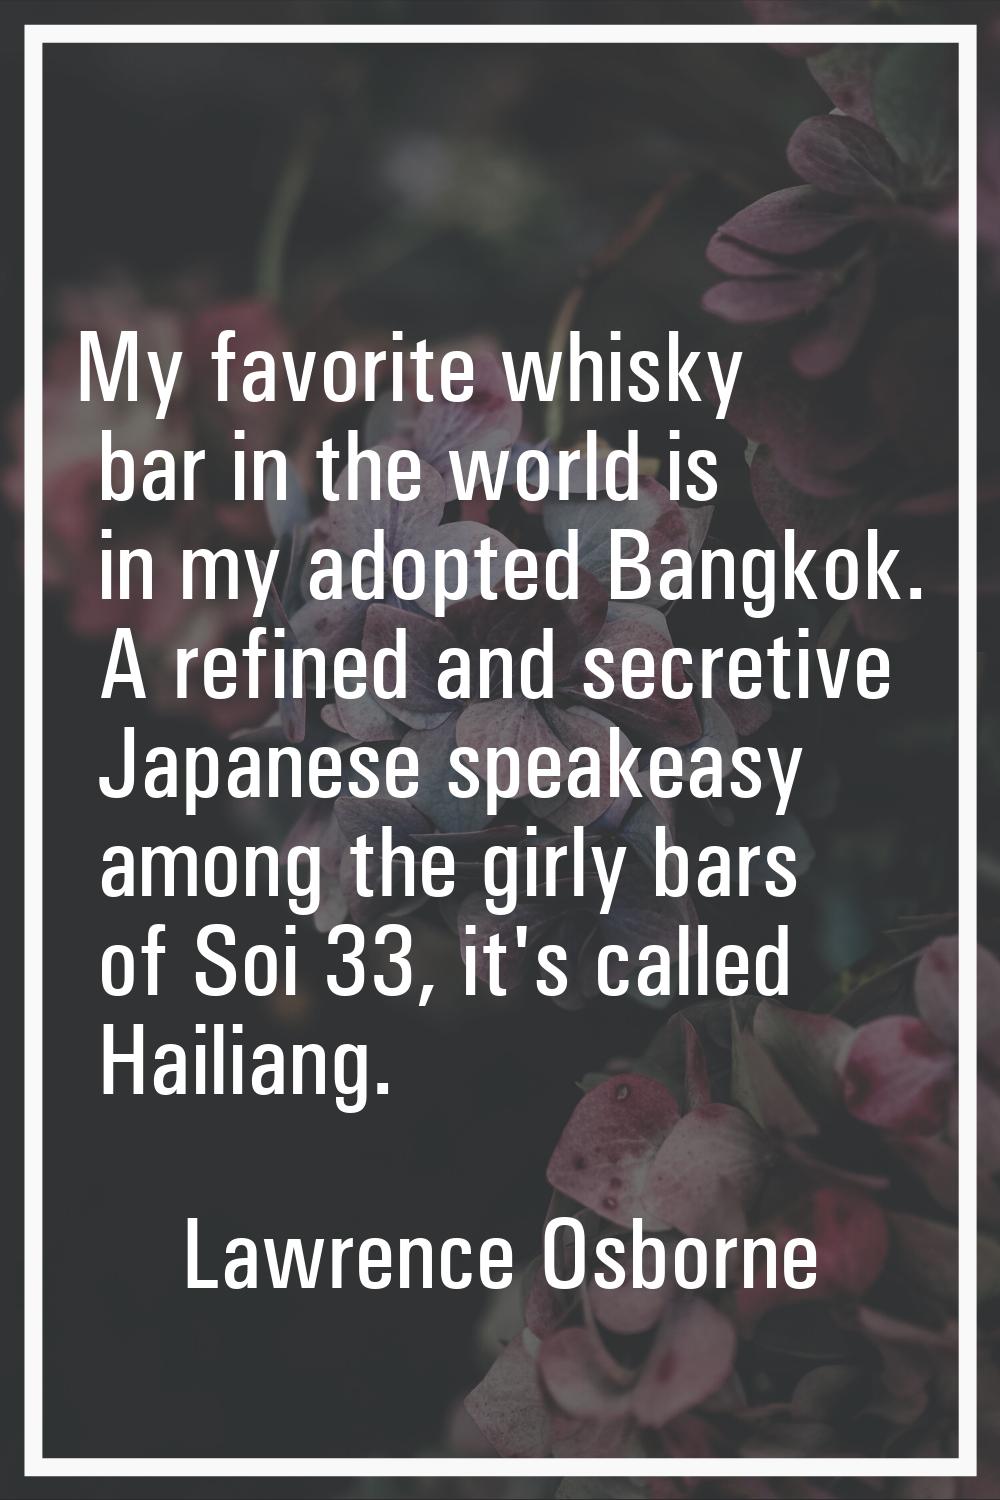 My favorite whisky bar in the world is in my adopted Bangkok. A refined and secretive Japanese spea